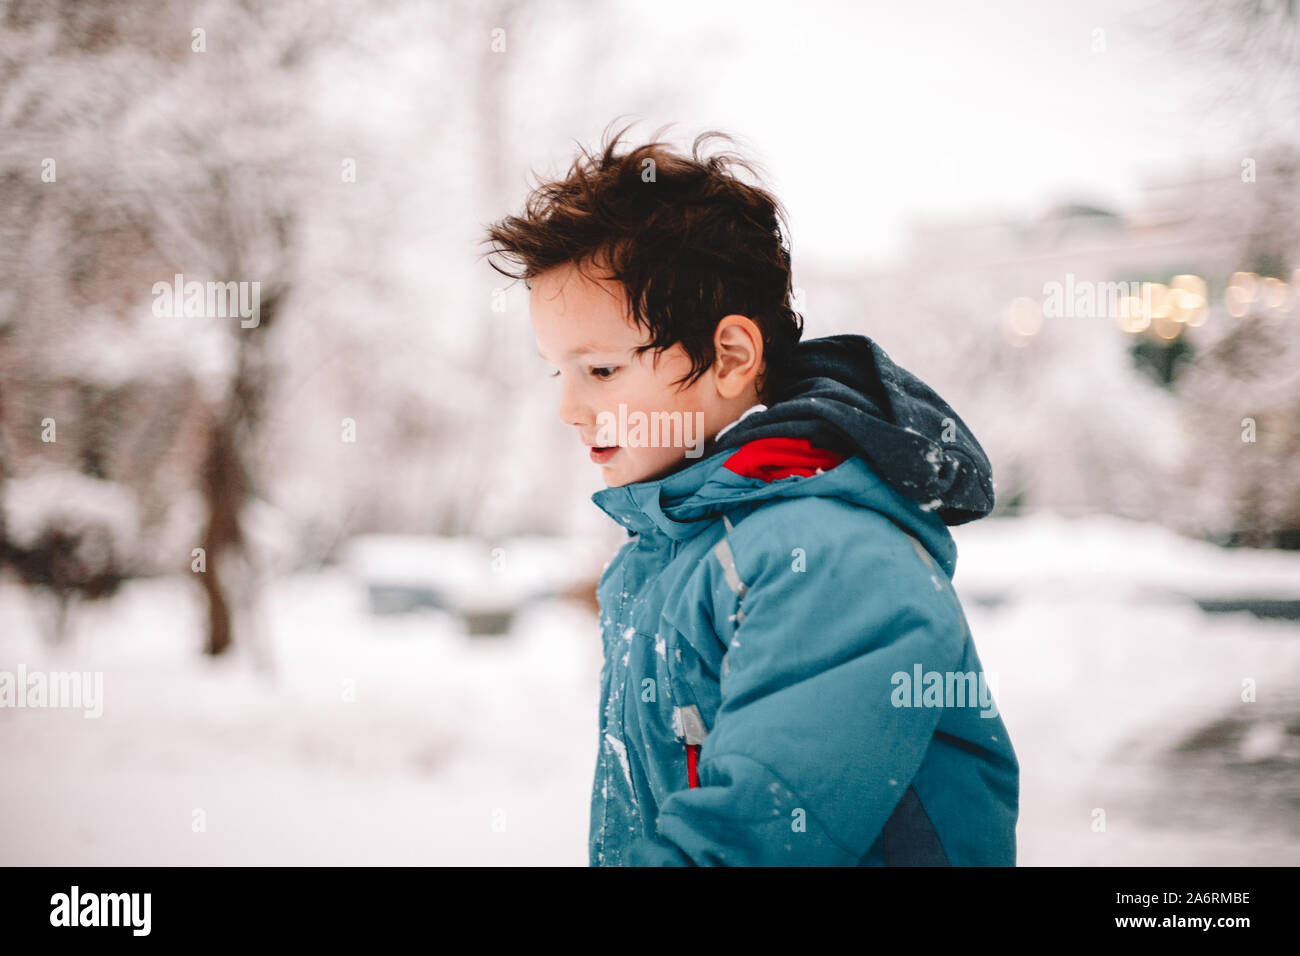 Boy walking in park during winter Stock Photo